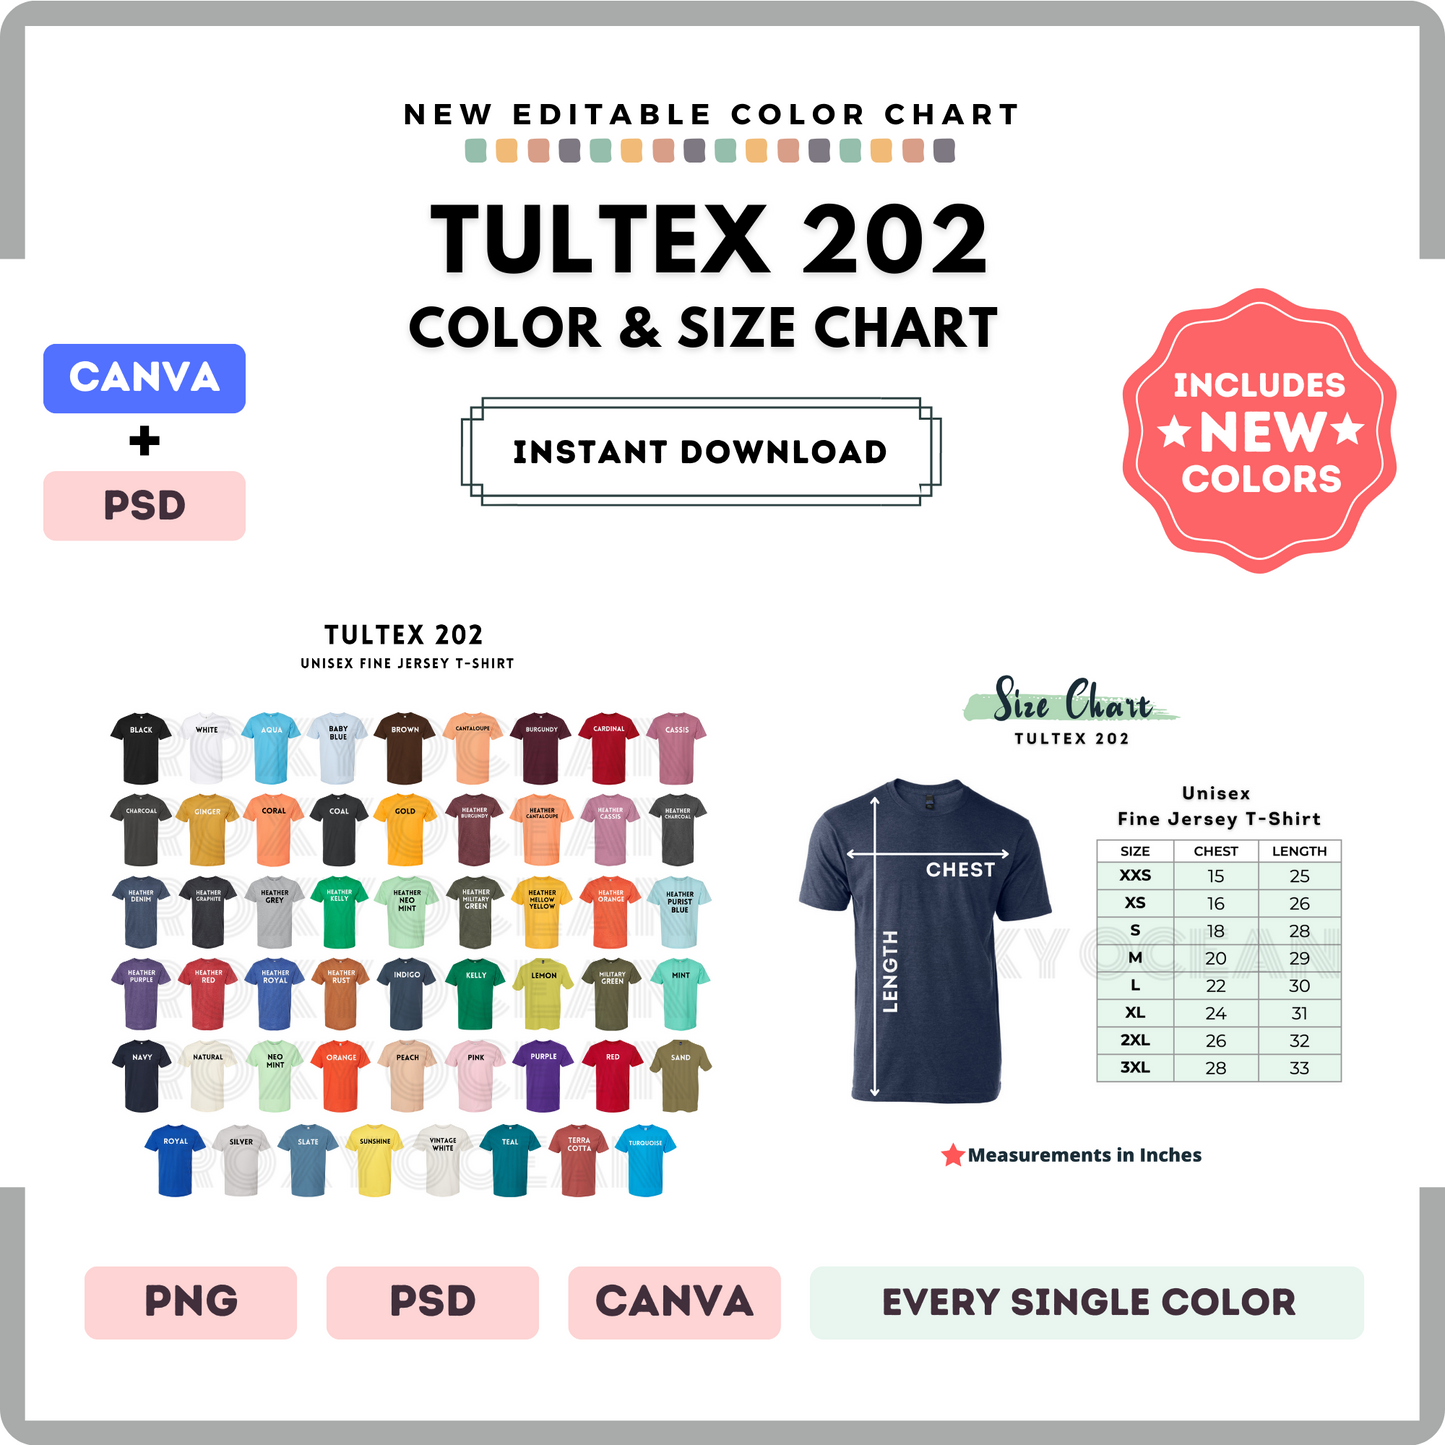 Tultex 202 Color and Size Chart